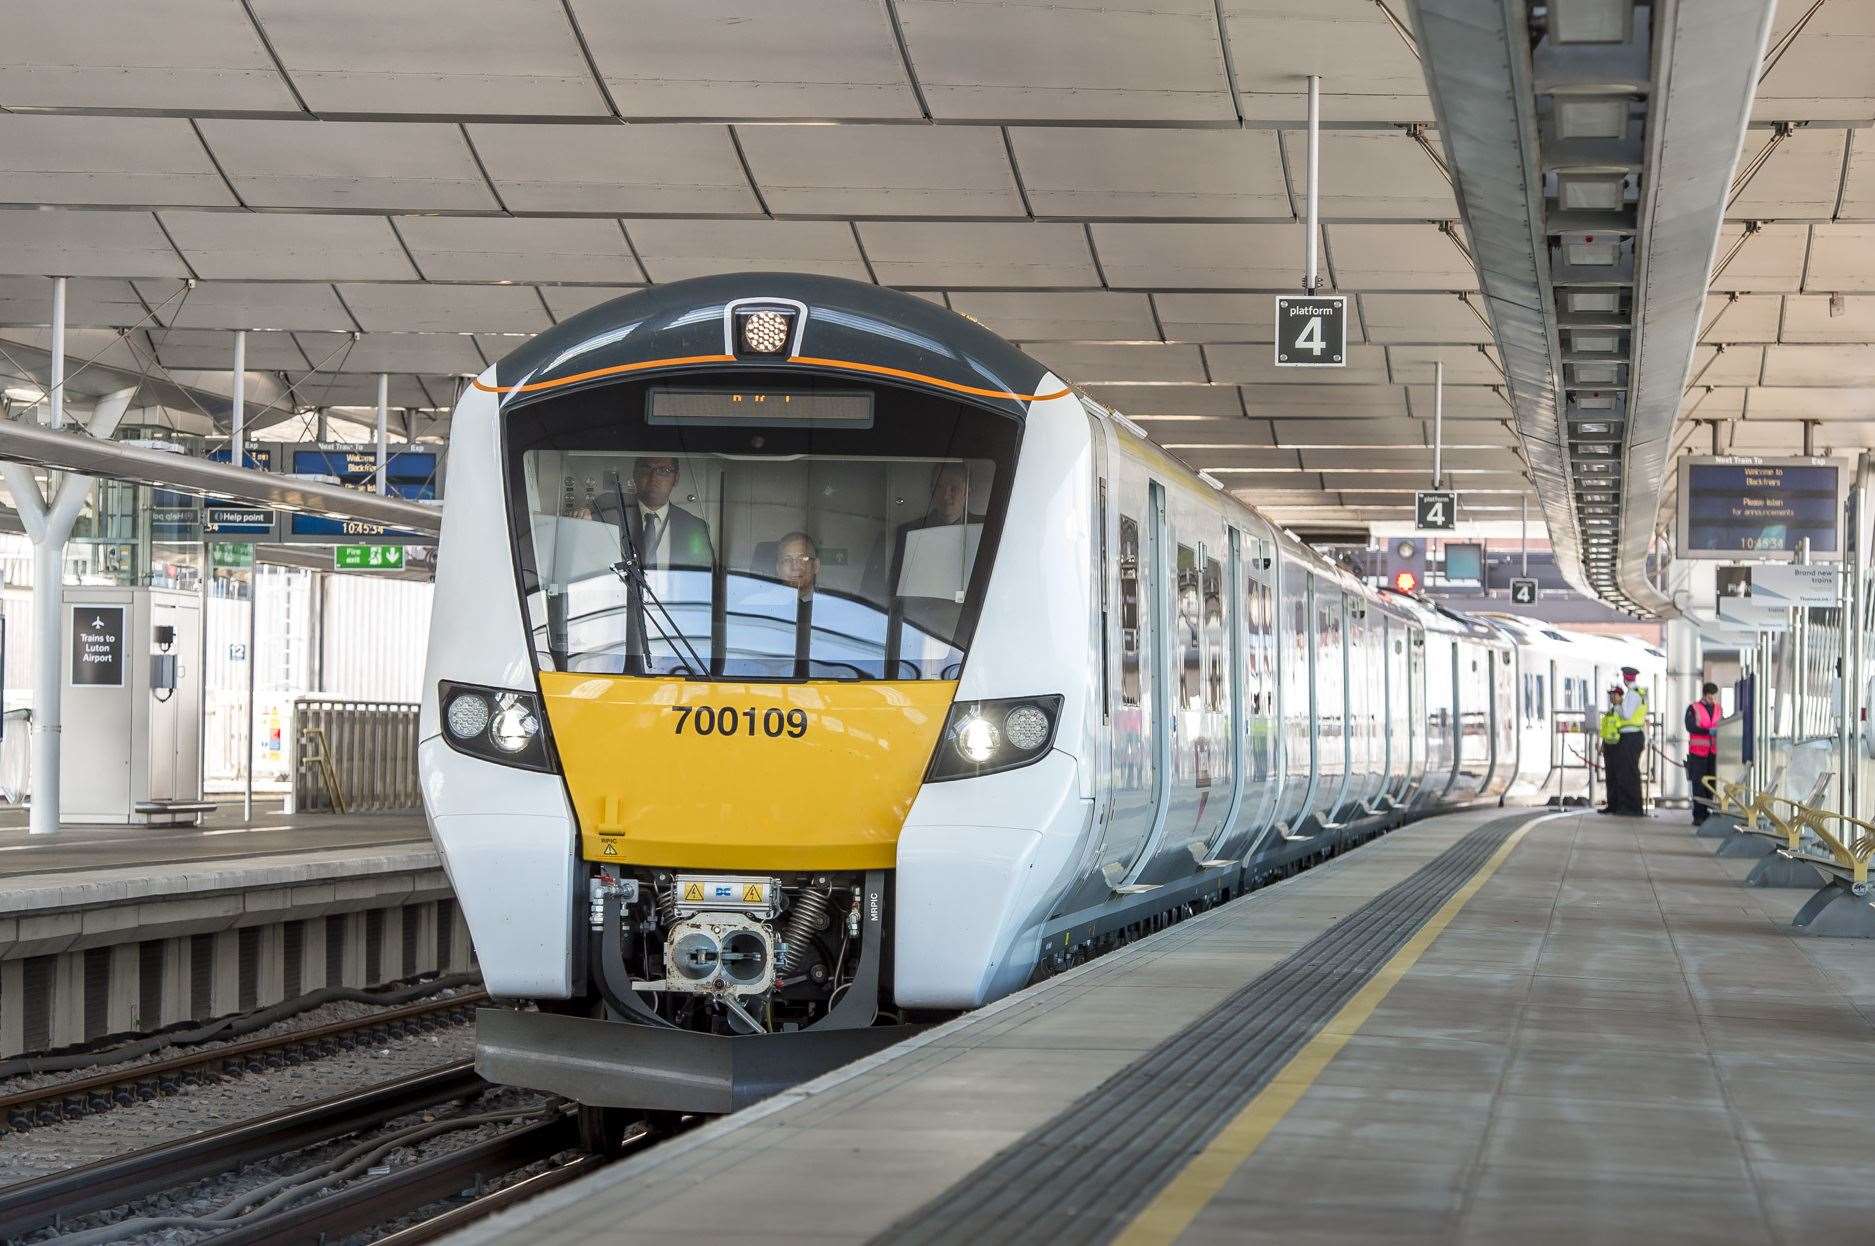 Thameslink services to Maidstone East are delayed